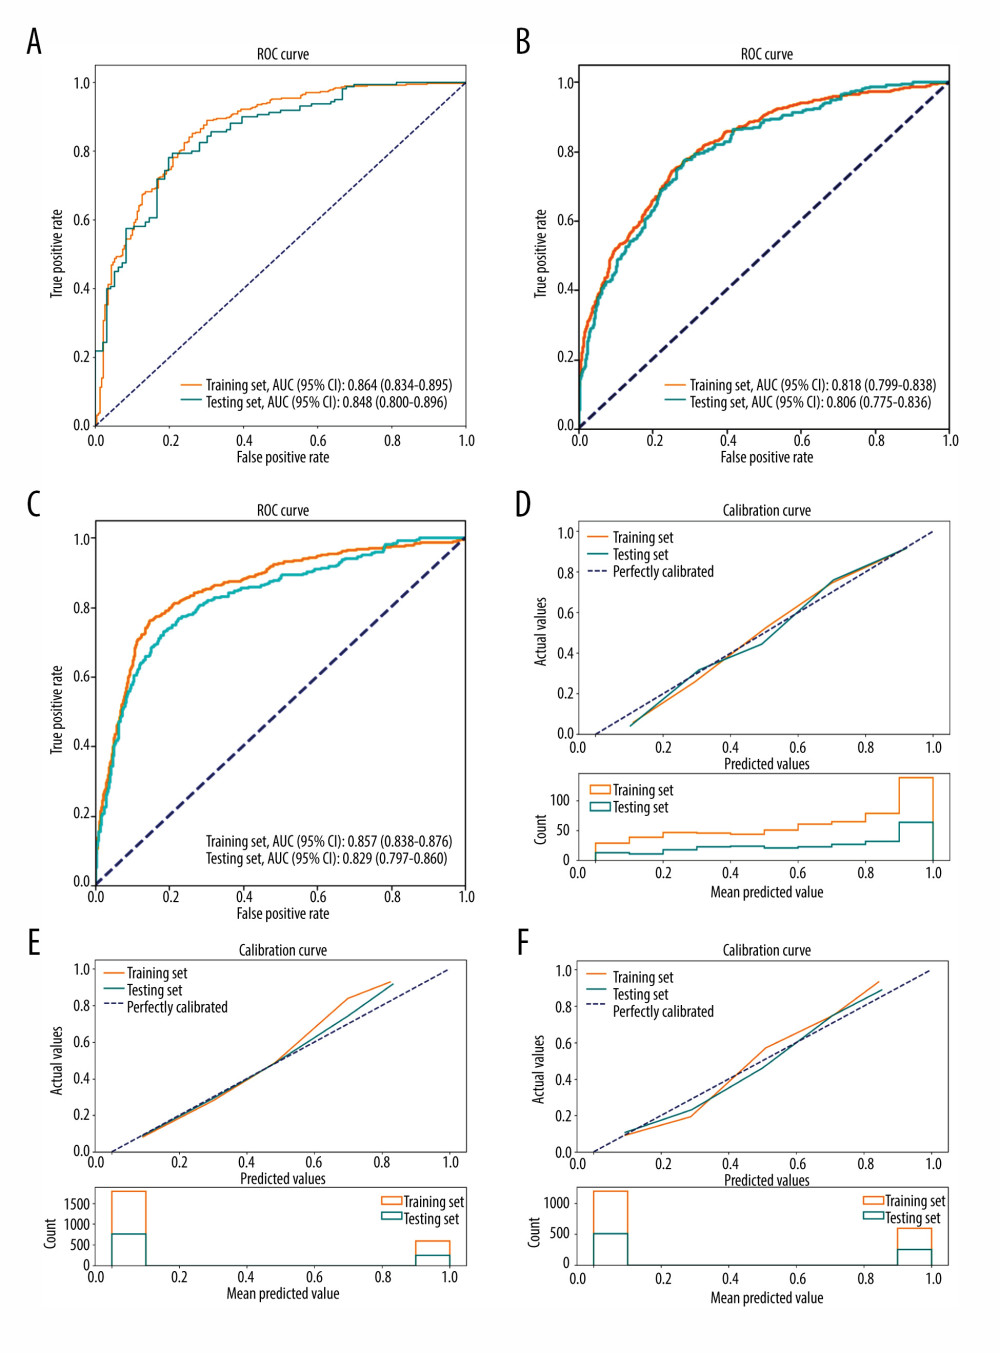 Receiver operating characteristic (ROC) curves for the training set and testing set in the patients when grouped into the following comparative subgroups: (A) colorectal cancer (CRC) and colorectal adenoma; (B) stage I, II, and III CRC and colorectal adenoma; (C) poorly differentiated CRC, moderately and well-differentiated CRC, and colorectal adenoma. Calibration plots of the training set and testing set in the patients when grouped into the following comparative subgroups: (D) CRC and colorectal adenoma; (E) stage I, II, and III CRC and colorectal adenoma; (F) poorly differentiated CRC, moderately and well-differentiated CRC, and colorectal adenoma. [Python software v. 3.8 (Python Software Foundation, DE, USA)]. AUC – the area under the curve; CI – confidence interval.